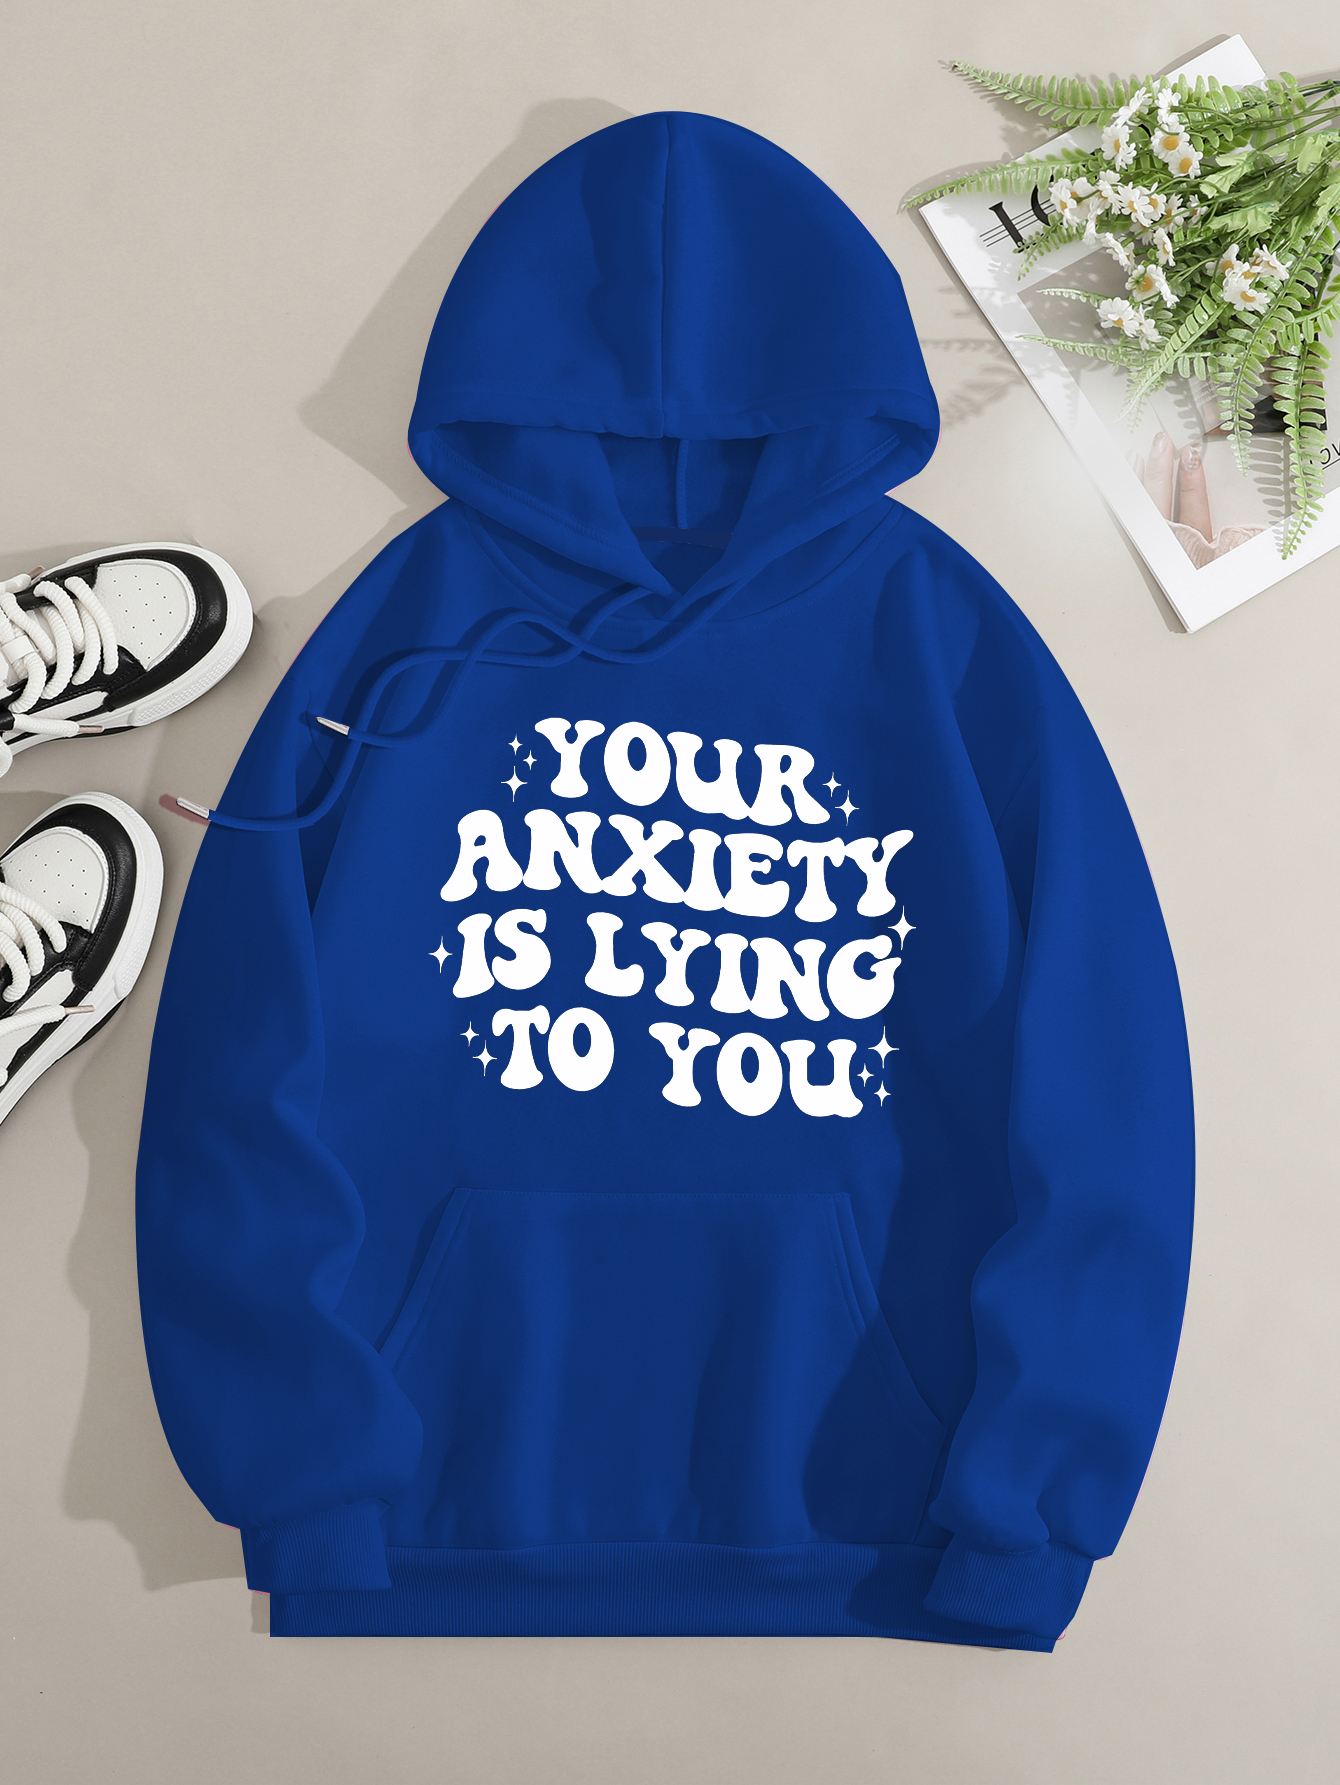 Printed on front Kangaroo Pocket Hoodie Long Sleeve for Women Pattern your anxiety is lying to you